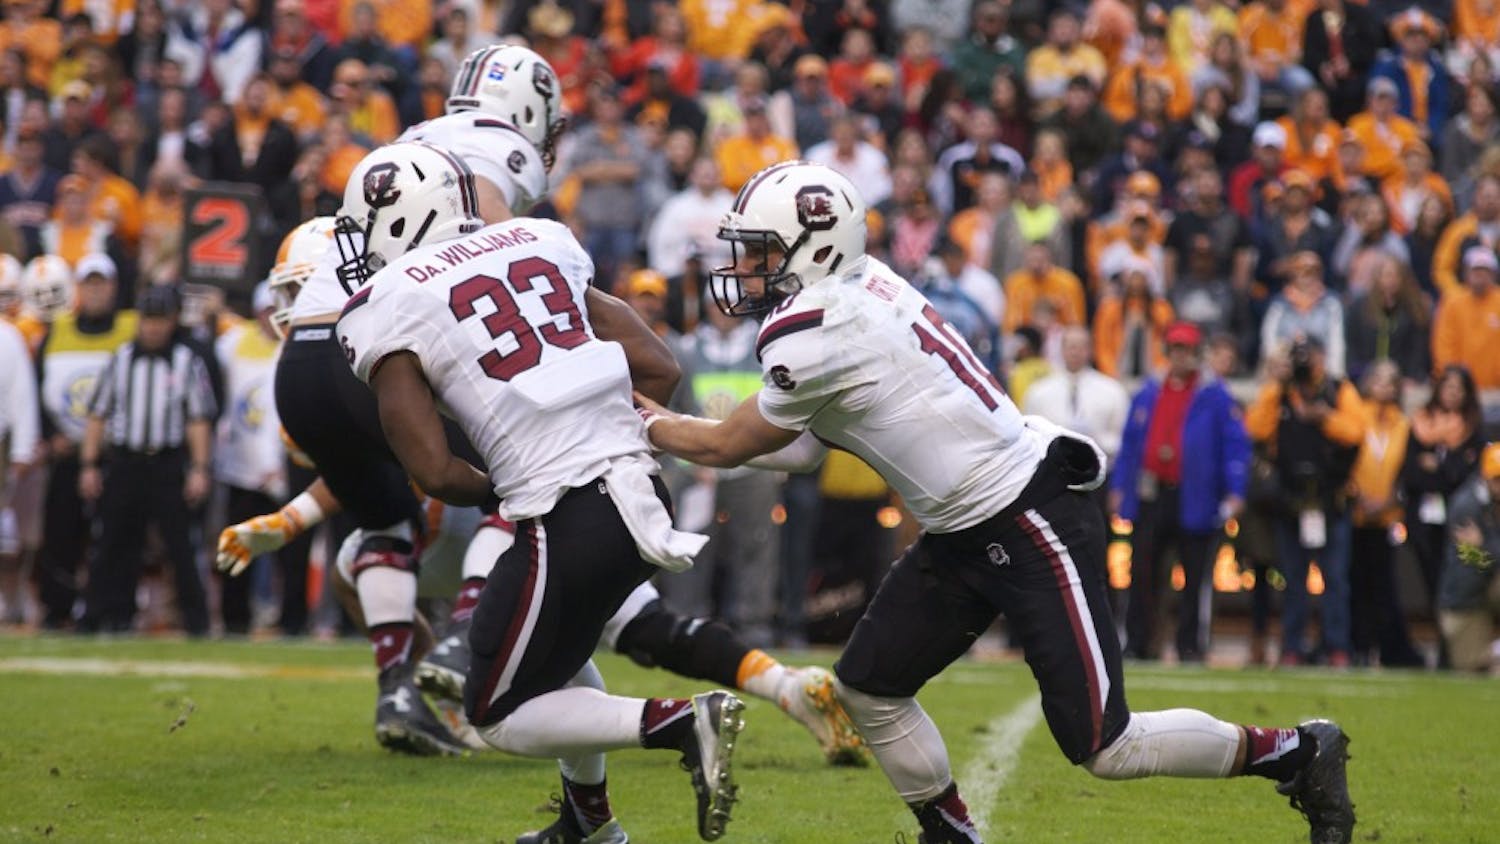 David Williams takes a handoff from Perry Orth in South Carolina's 27-24 loss to Tennessee on Nov. 7.